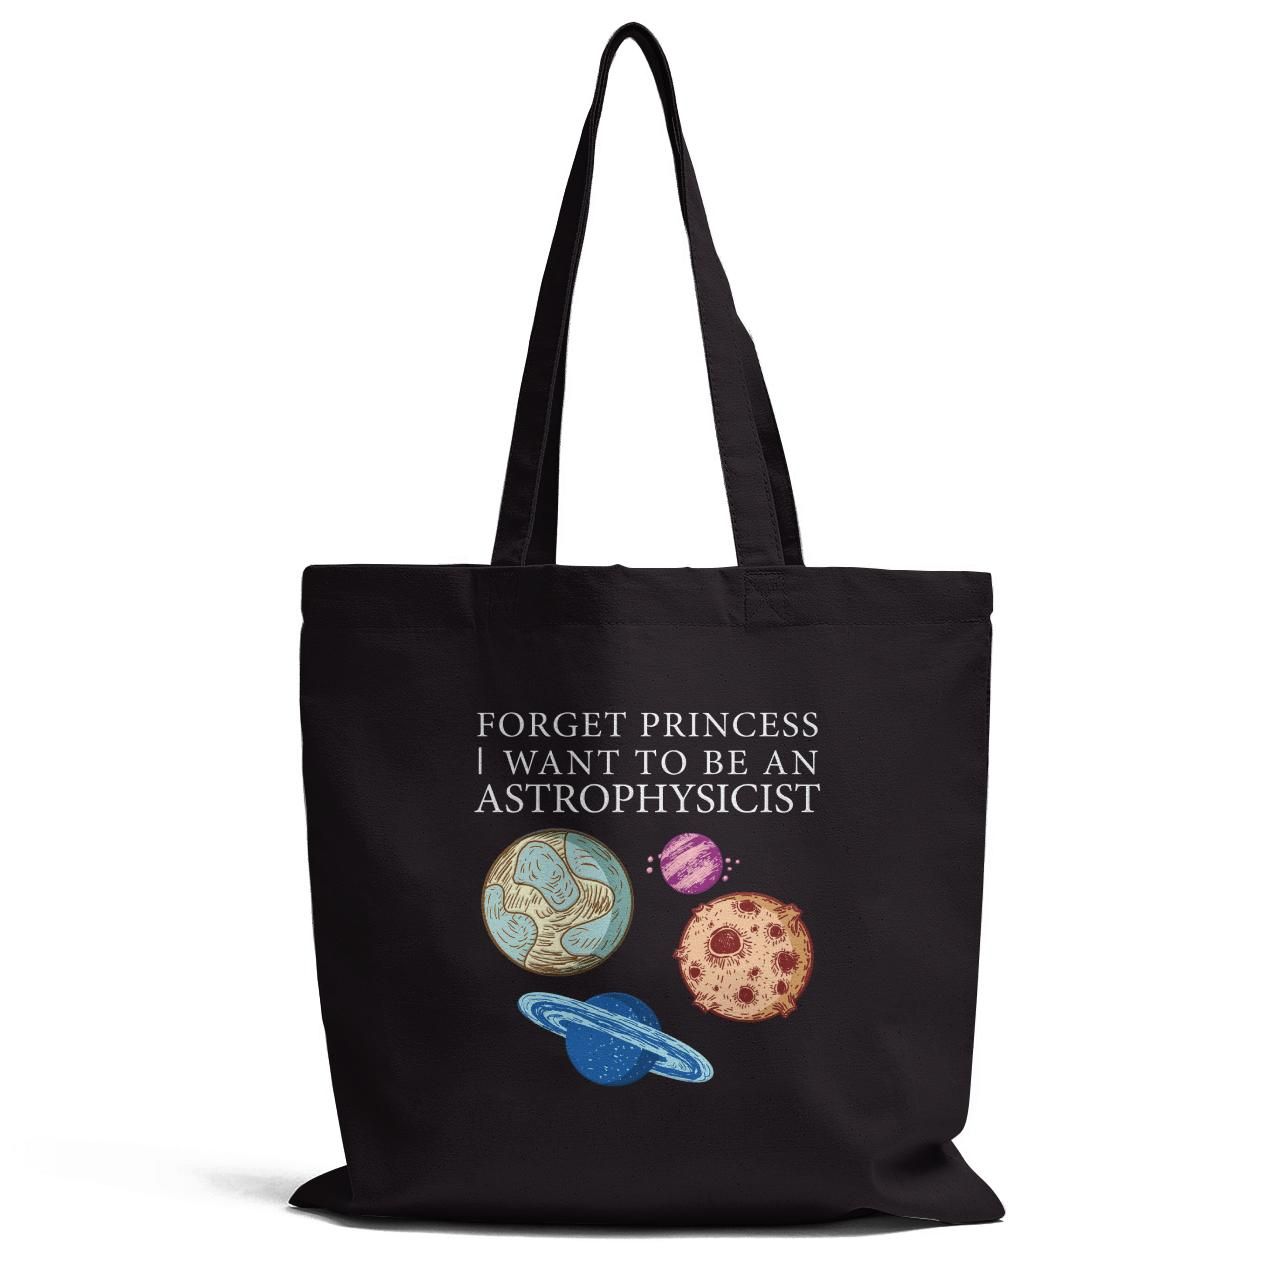 Forget Princess I Want To Be An Astrophysicist Tote Bag